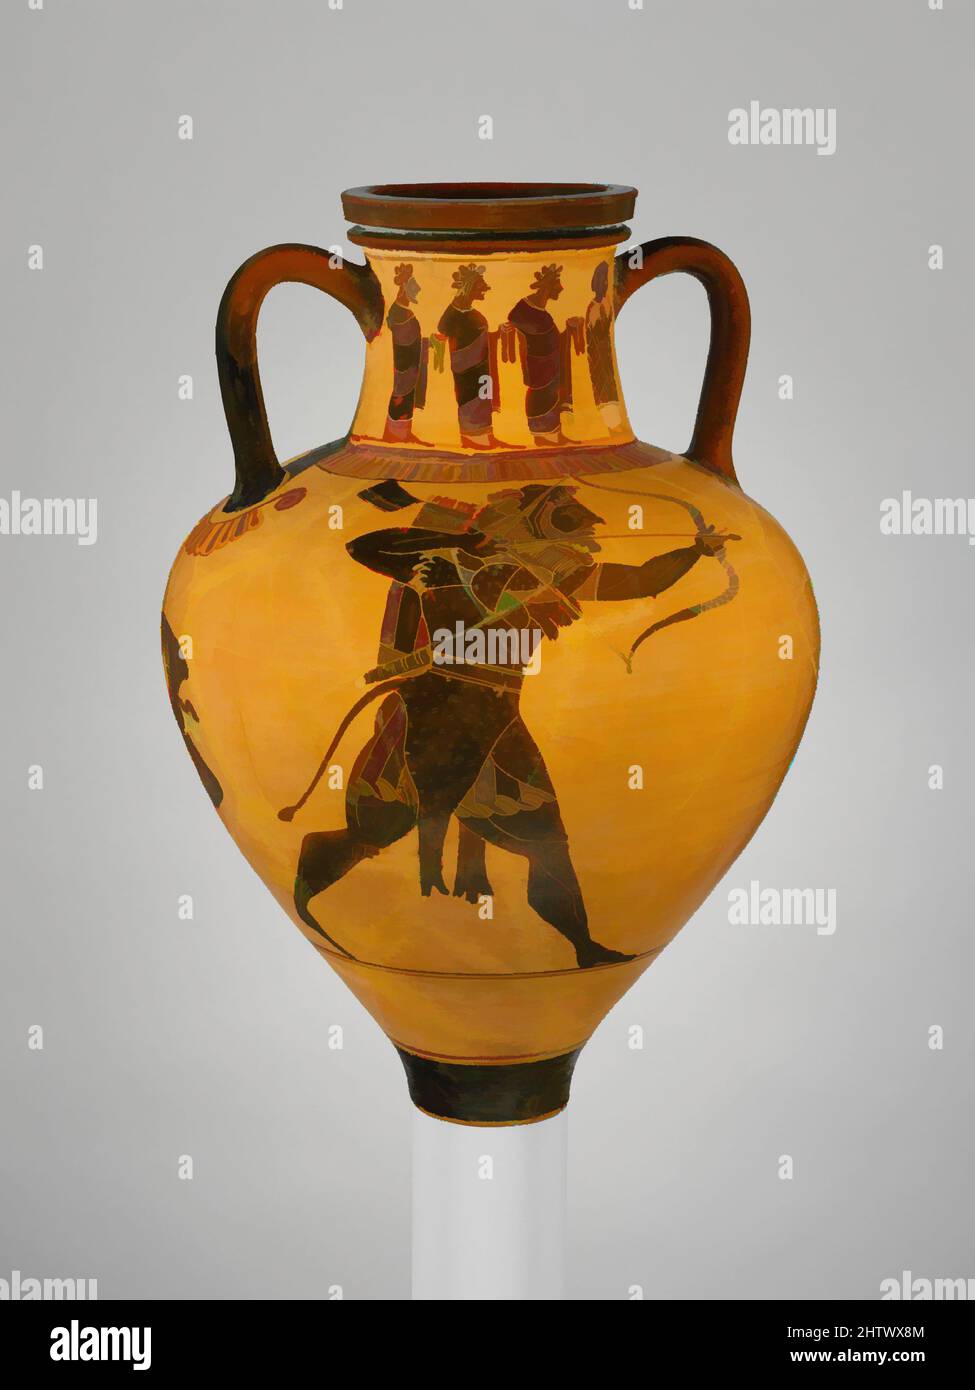 Art inspired by Terracotta neck-amphora (jar), Archaic, ca. 540–530 B.C., Greek, Attic, Terracotta; black-figure, H: 13' Greatest diameter: 8 3/4', Vases, Obverse, Herakles; reverse, Geryon. On the neck, obverse and reverse, a flute-player leading a procession of youths and men. One of, Classic works modernized by Artotop with a splash of modernity. Shapes, color and value, eye-catching visual impact on art. Emotions through freedom of artworks in a contemporary way. A timeless message pursuing a wildly creative new direction. Artists turning to the digital medium and creating the Artotop NFT Stock Photo